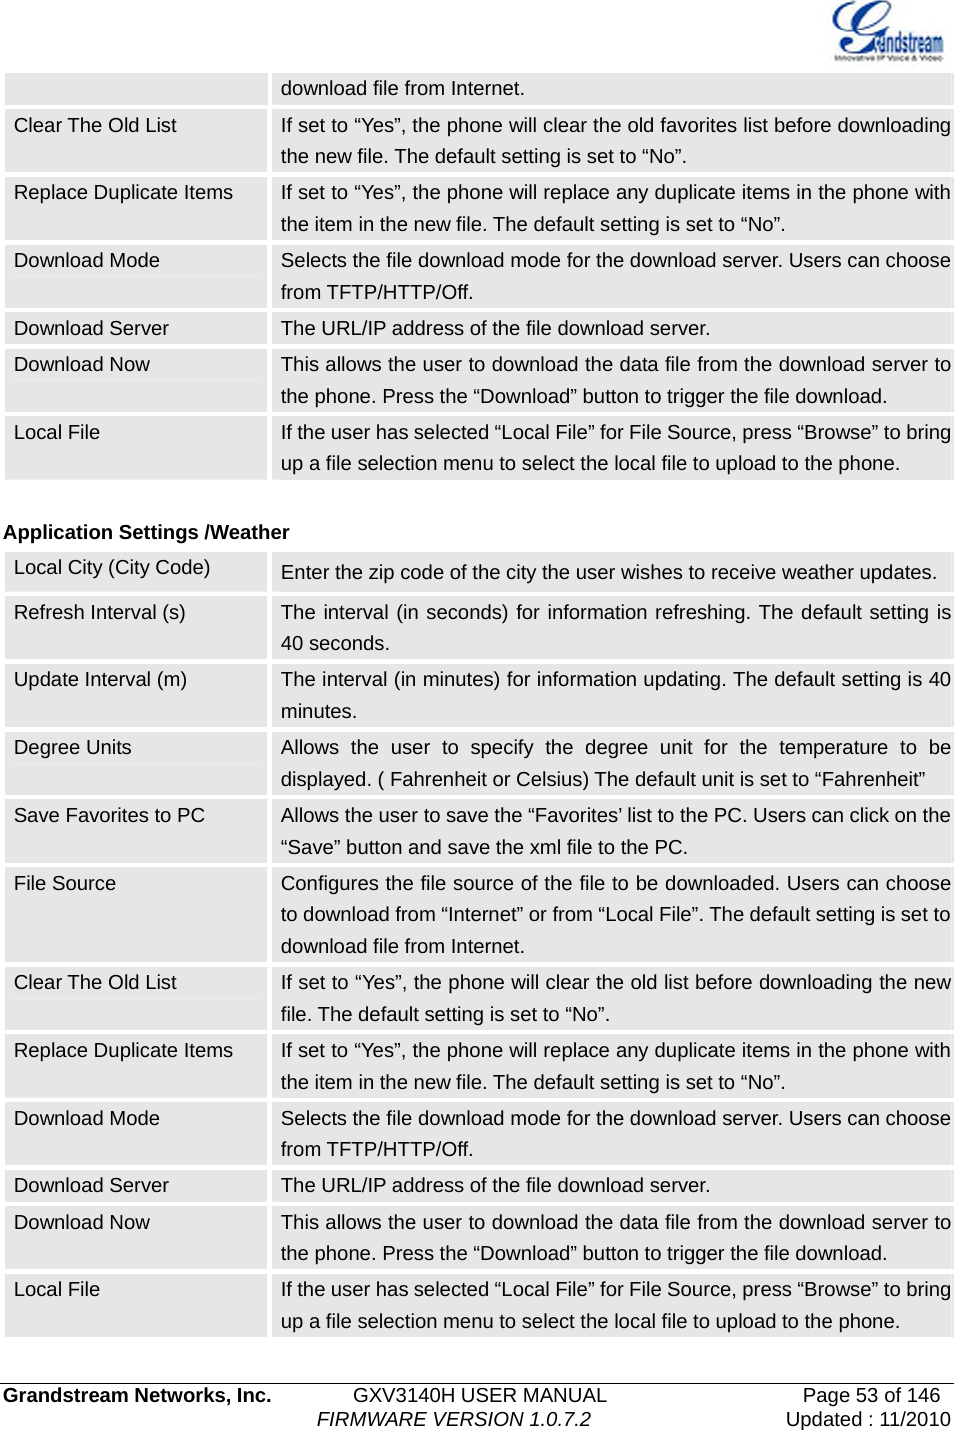   Grandstream Networks, Inc.        GXV3140H USER MANUAL                  Page 53 of 146                                FIRMWARE VERSION 1.0.7.2 Updated : 11/2010  download file from Internet. Clear The Old List  If set to “Yes”, the phone will clear the old favorites list before downloading the new file. The default setting is set to “No”. Replace Duplicate Items  If set to “Yes”, the phone will replace any duplicate items in the phone with the item in the new file. The default setting is set to “No”. Download Mode  Selects the file download mode for the download server. Users can choose from TFTP/HTTP/Off. Download Server  The URL/IP address of the file download server. Download Now  This allows the user to download the data file from the download server to the phone. Press the “Download” button to trigger the file download. Local File  If the user has selected “Local File” for File Source, press “Browse” to bring up a file selection menu to select the local file to upload to the phone.  Application Settings /Weather Local City (City Code)  Enter the zip code of the city the user wishes to receive weather updates. Refresh Interval (s)  The interval (in seconds) for information refreshing. The default setting is 40 seconds. Update Interval (m)  The interval (in minutes) for information updating. The default setting is 40 minutes. Degree Units    Allows the user to specify the degree unit for the temperature to be displayed. ( Fahrenheit or Celsius) The default unit is set to “Fahrenheit”   Save Favorites to PC  Allows the user to save the “Favorites’ list to the PC. Users can click on the “Save” button and save the xml file to the PC. File Source  Configures the file source of the file to be downloaded. Users can choose to download from “Internet” or from “Local File”. The default setting is set to download file from Internet. Clear The Old List  If set to “Yes”, the phone will clear the old list before downloading the new file. The default setting is set to “No”. Replace Duplicate Items  If set to “Yes”, the phone will replace any duplicate items in the phone with the item in the new file. The default setting is set to “No”. Download Mode  Selects the file download mode for the download server. Users can choose from TFTP/HTTP/Off.   Download Server  The URL/IP address of the file download server. Download Now  This allows the user to download the data file from the download server to the phone. Press the “Download” button to trigger the file download. Local File  If the user has selected “Local File” for File Source, press “Browse” to bring up a file selection menu to select the local file to upload to the phone.   